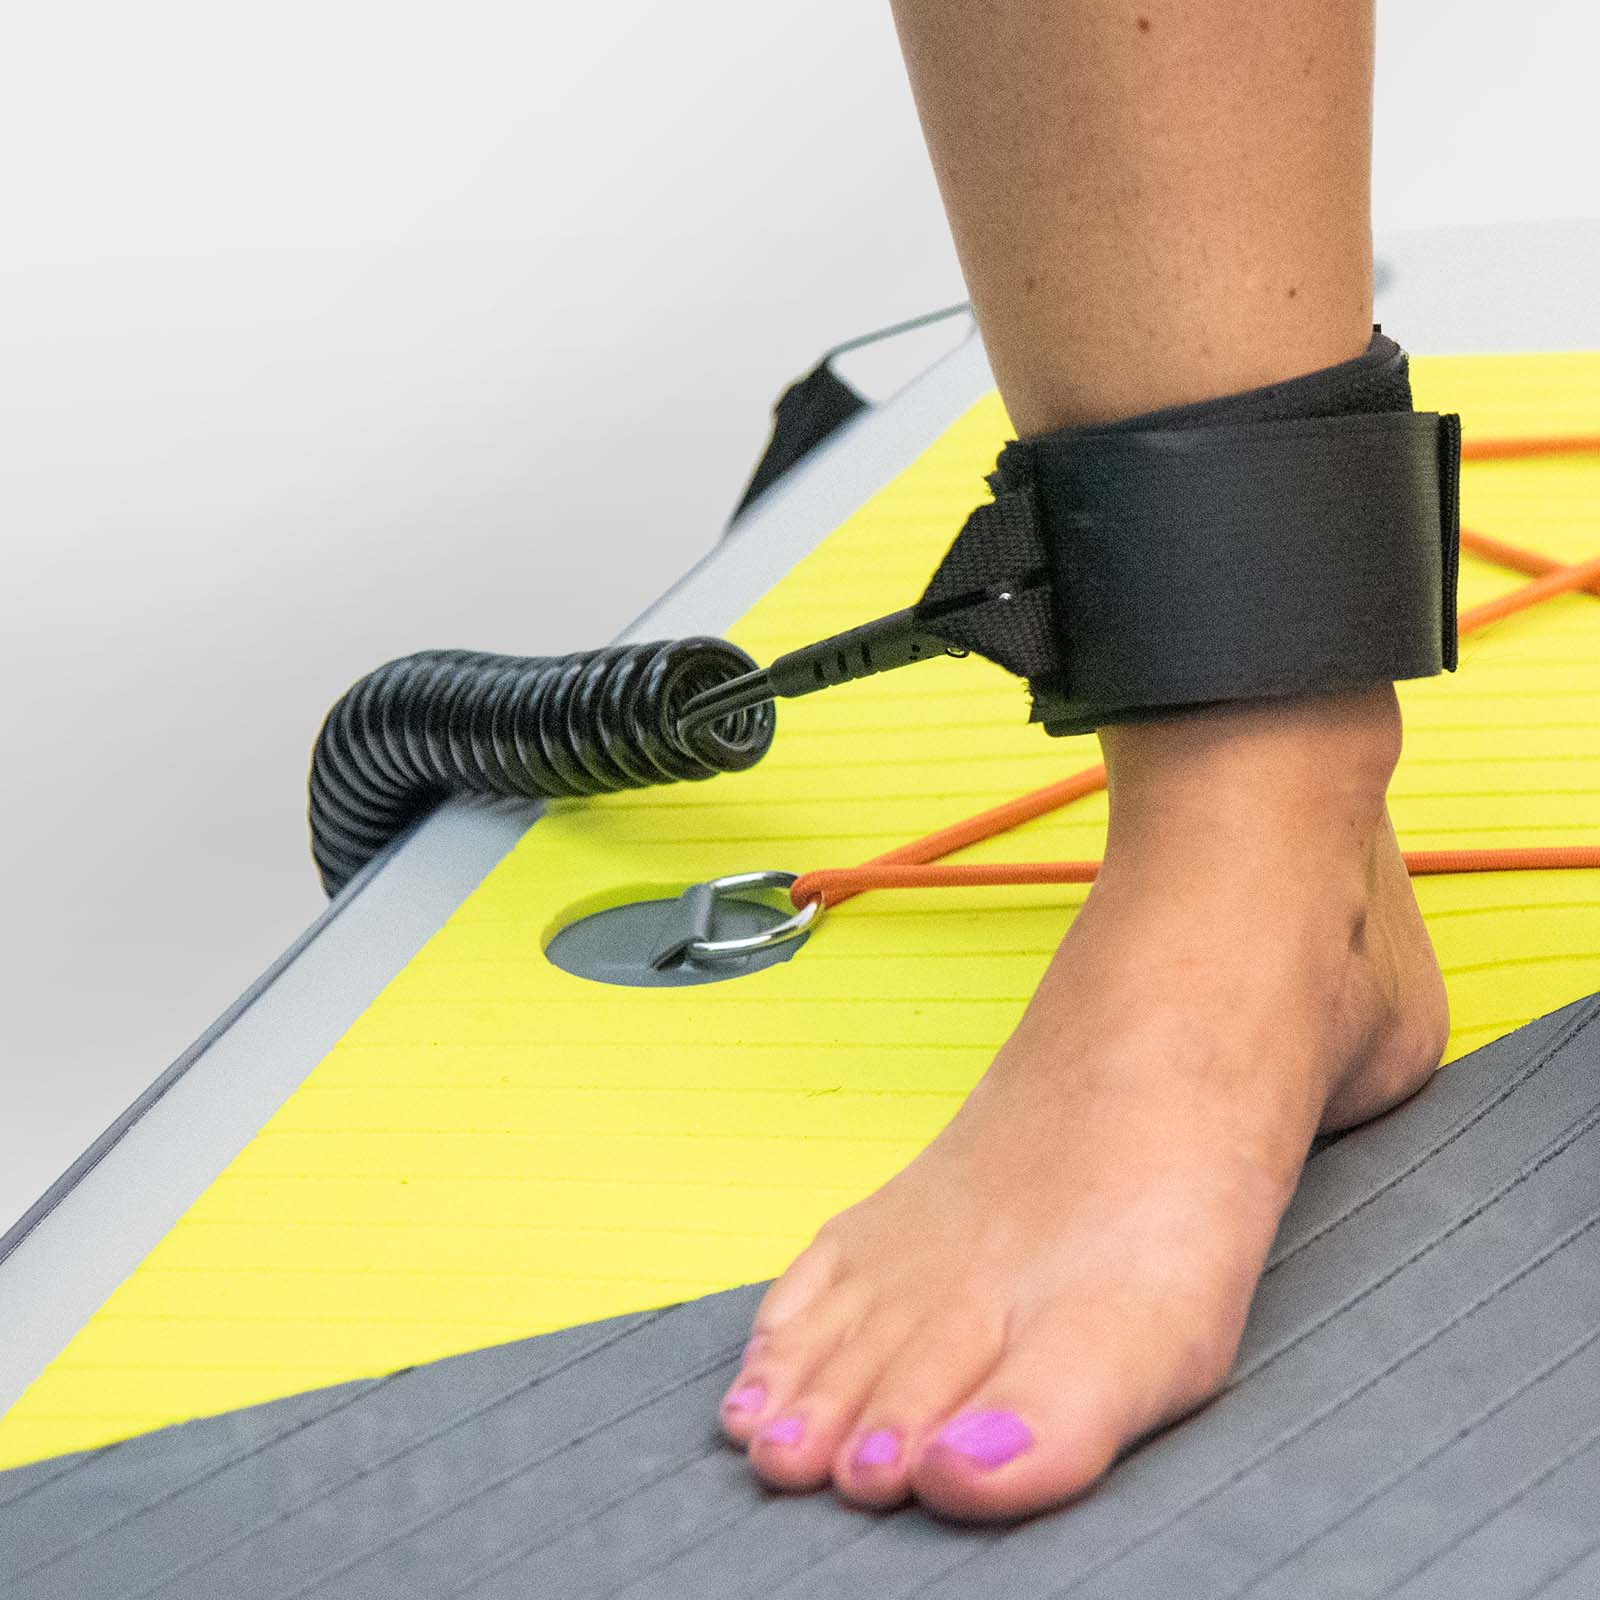 coil isup leash on persons ankle